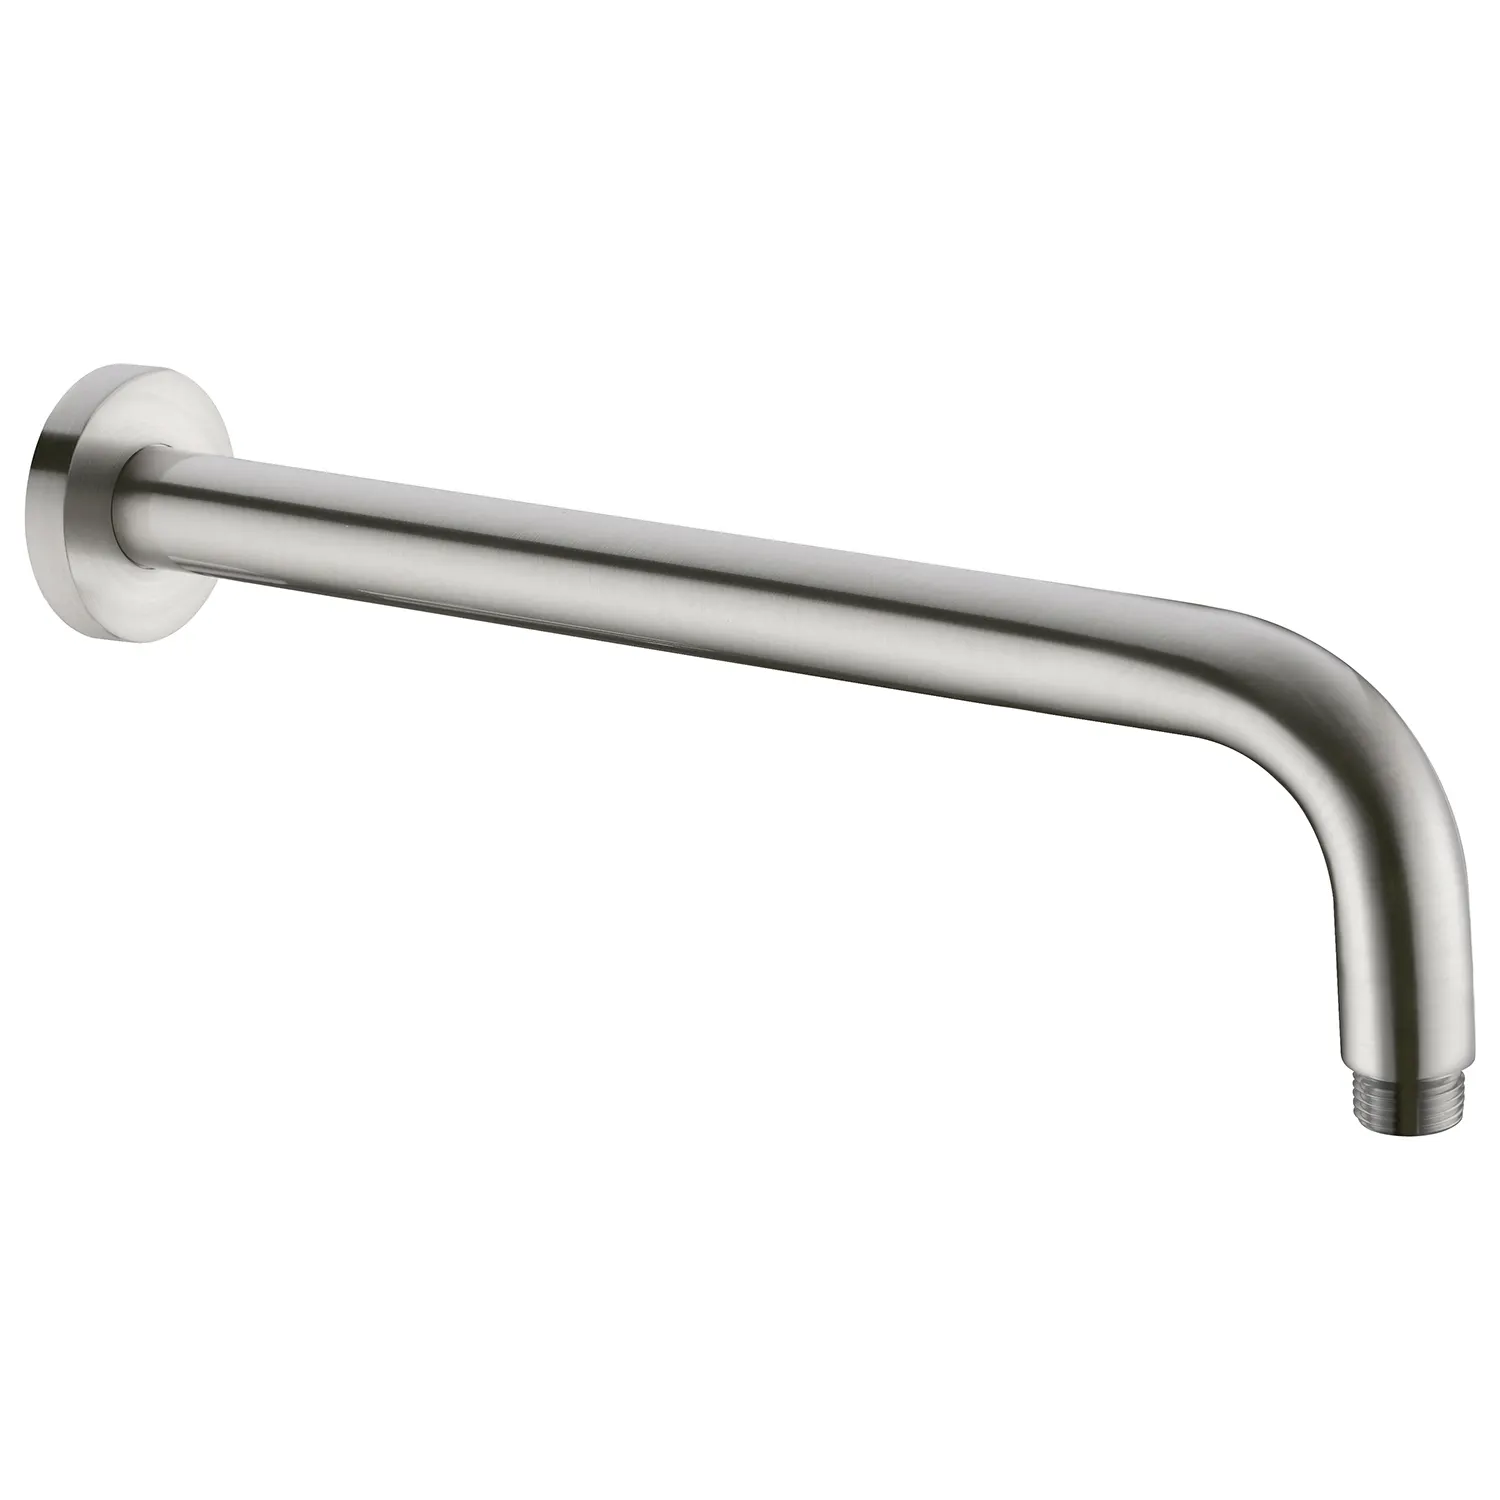 YSW high quality all solid copper bathroom faucet Accessories L shape round shower arm with 350mm length